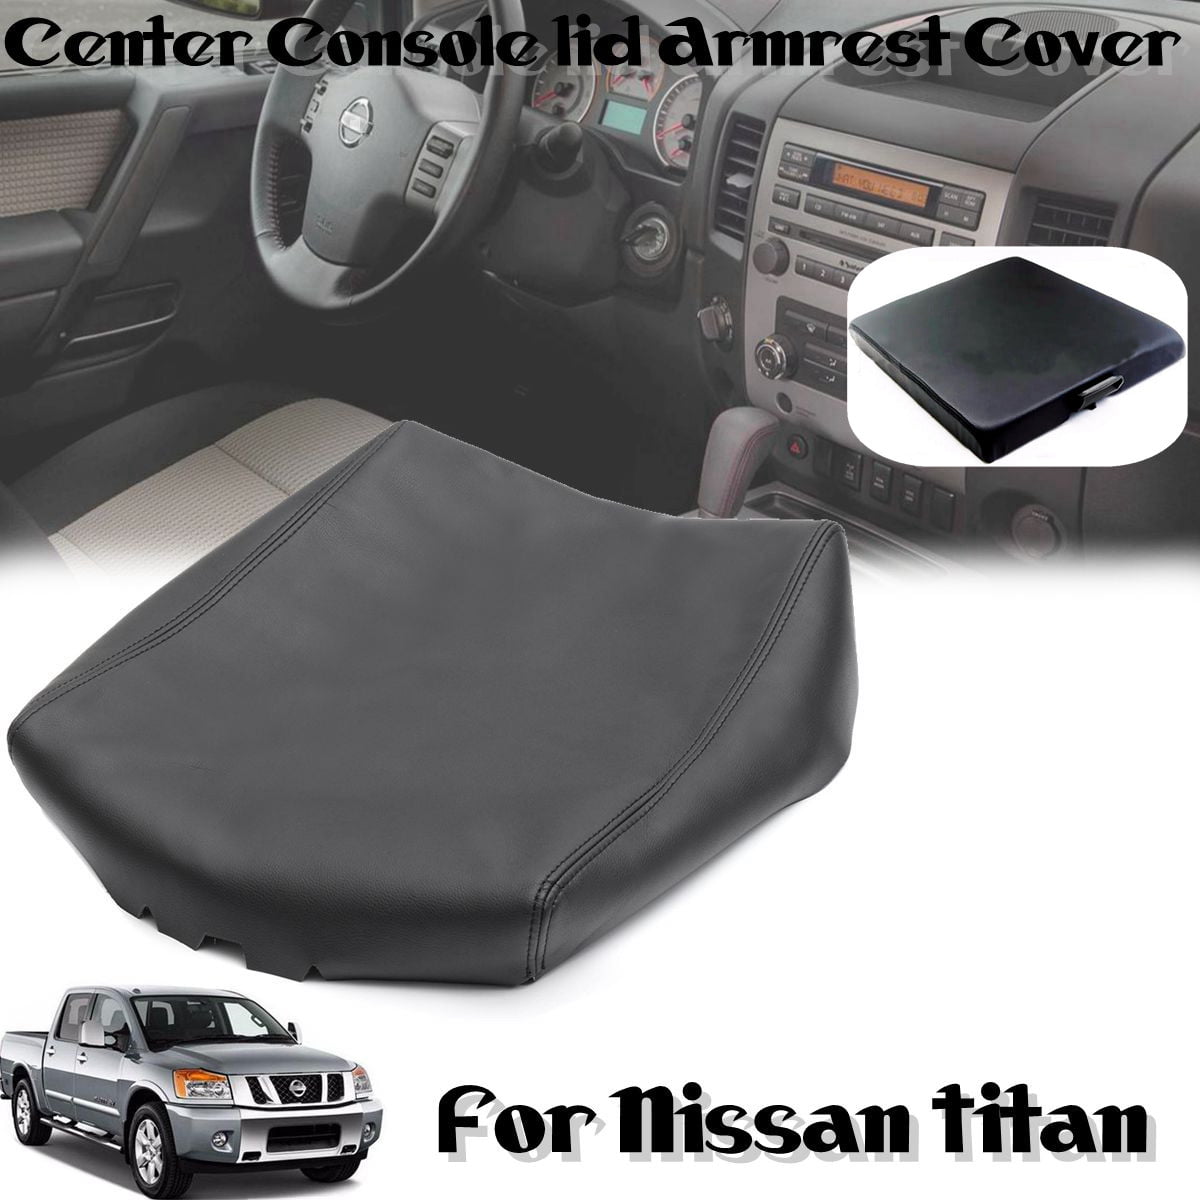 QKPARTS Leather Center Console Lid Armrest Cover For 2004-2014 Nissan Titan Black NEW